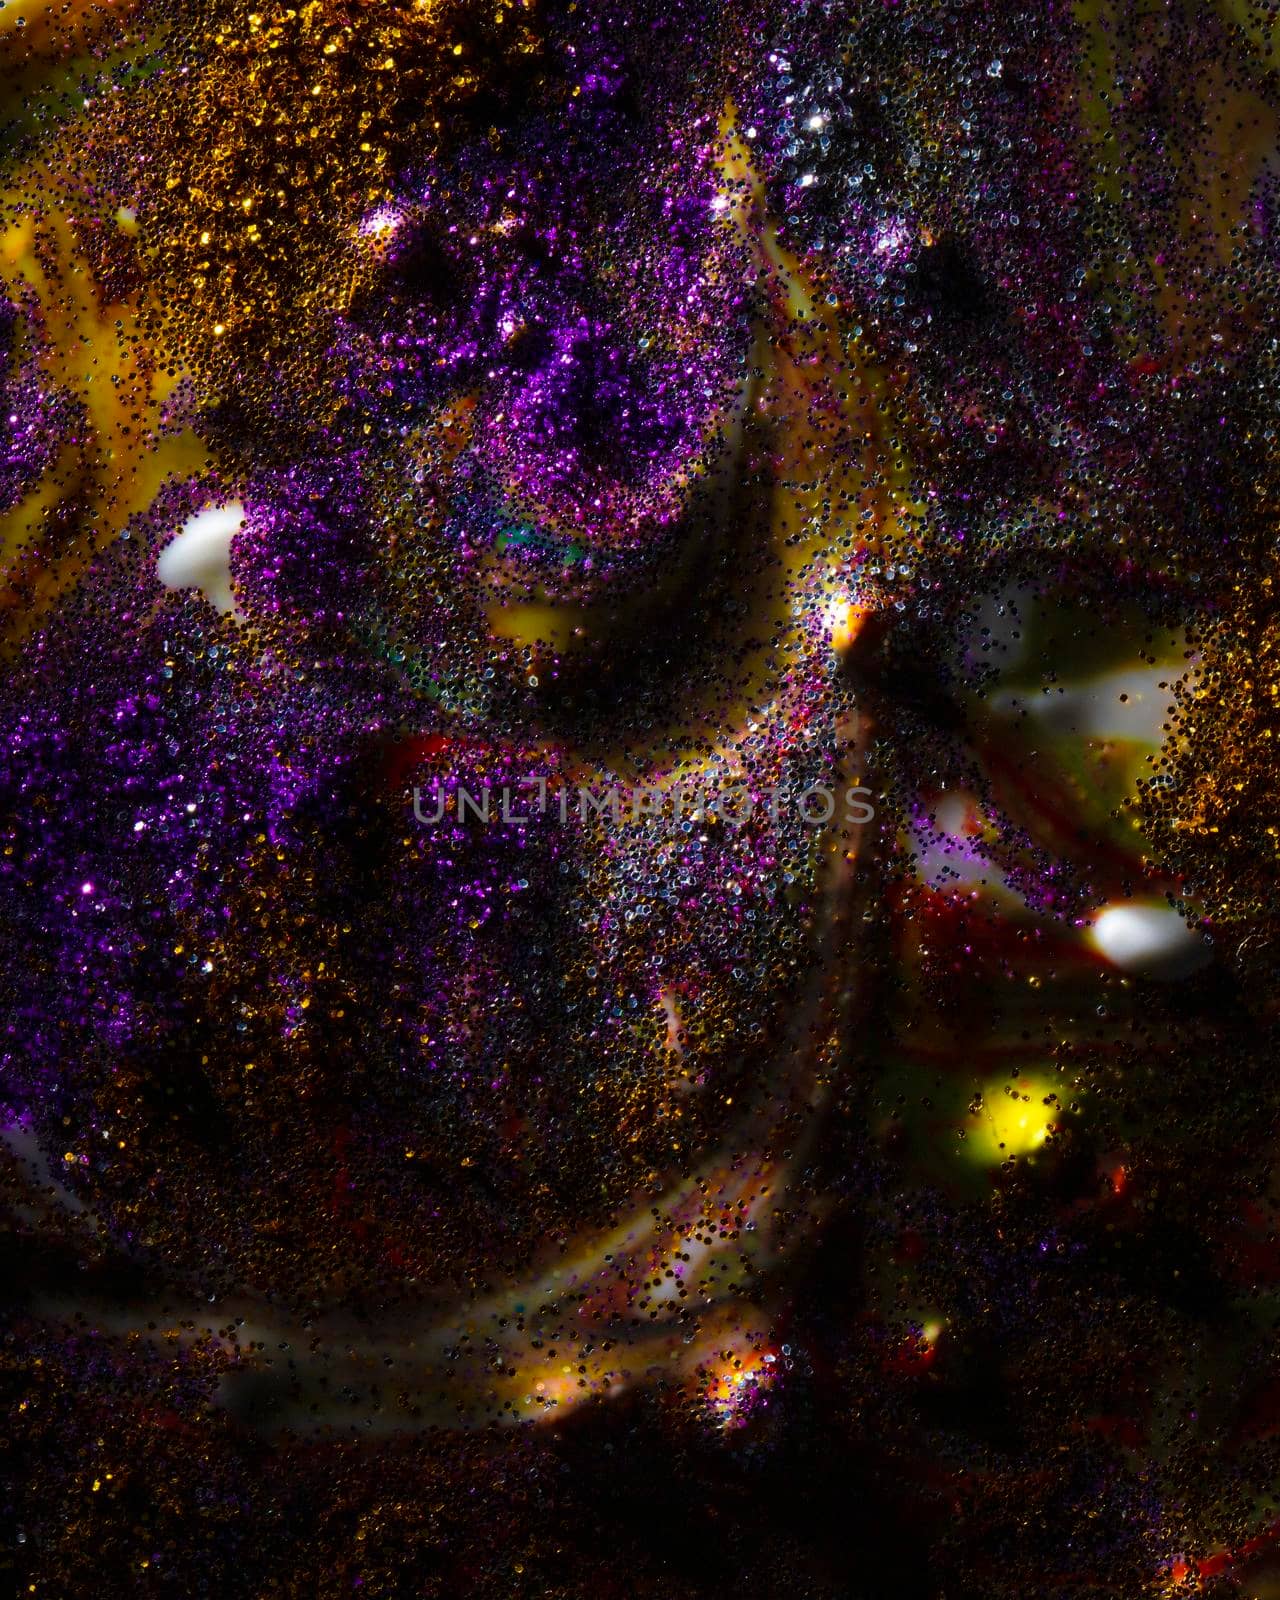 Vertically on a dark background, sprinkled with purple and gold sparkles with streaks and waves. Contemporary creativity. A colorful avant-garde painting with rich texture. A background made up of many shapes and materials.